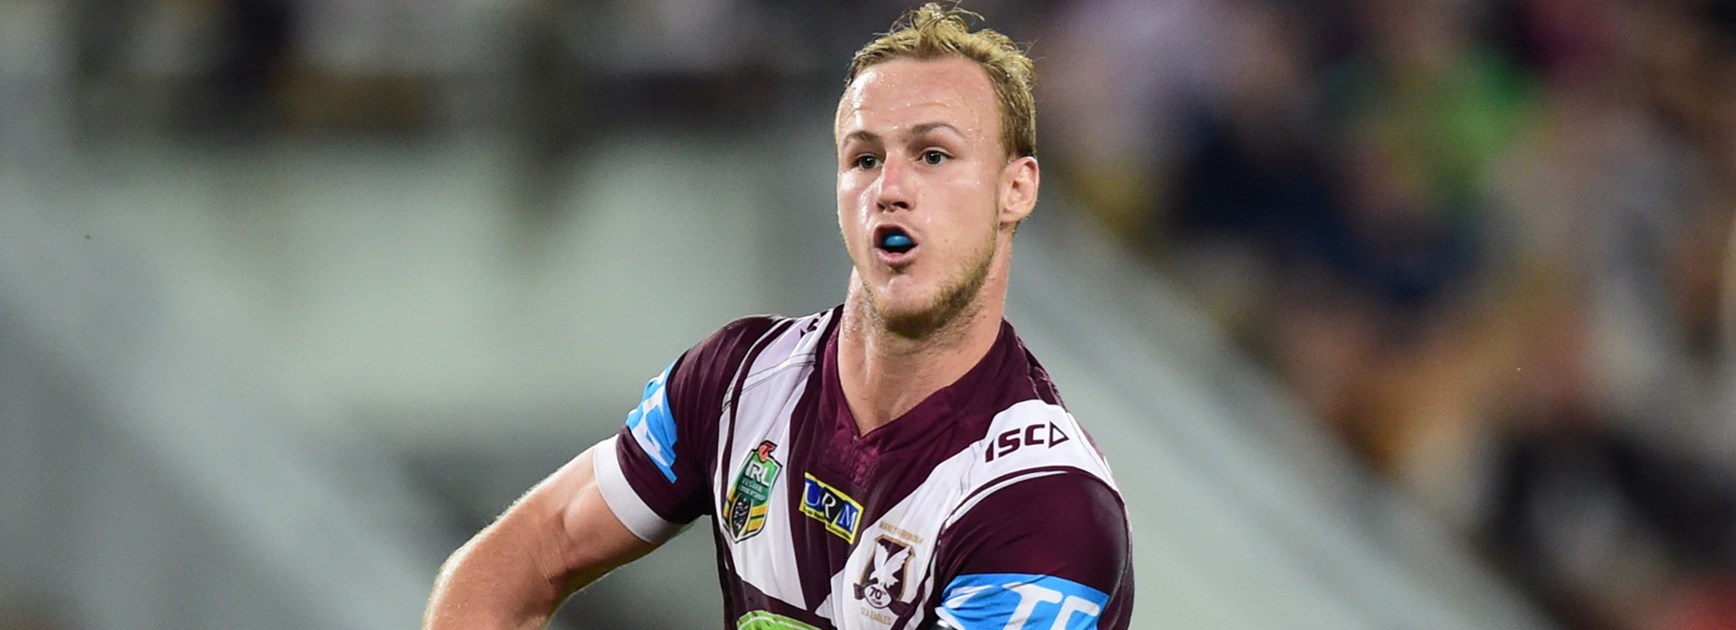 Sea Eagles halfback Daly Cherry-Evans against the Broncos in Round 10.